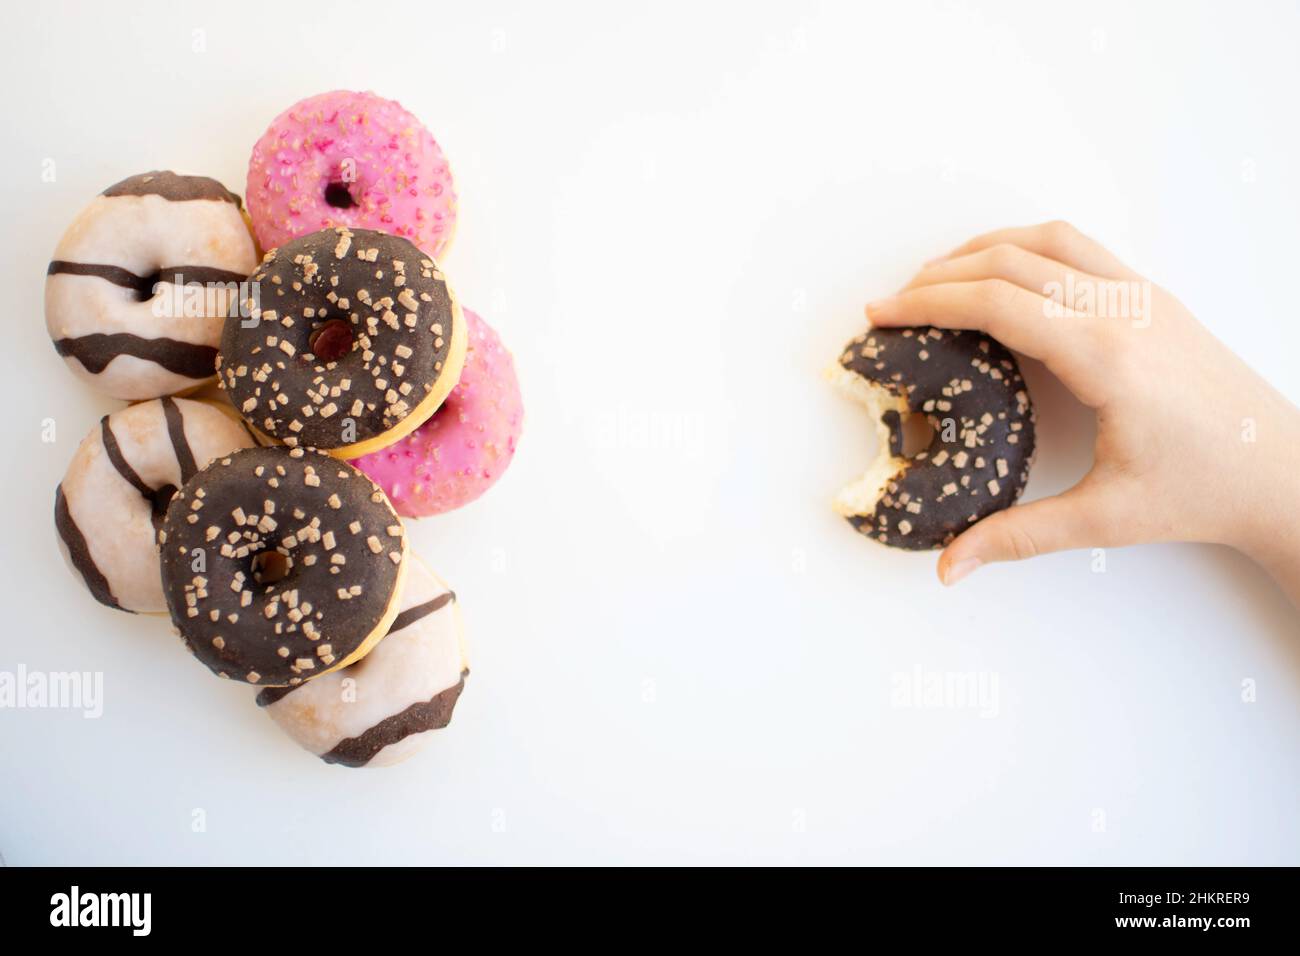 Colorful and sweet glazed donuts Stock Photo